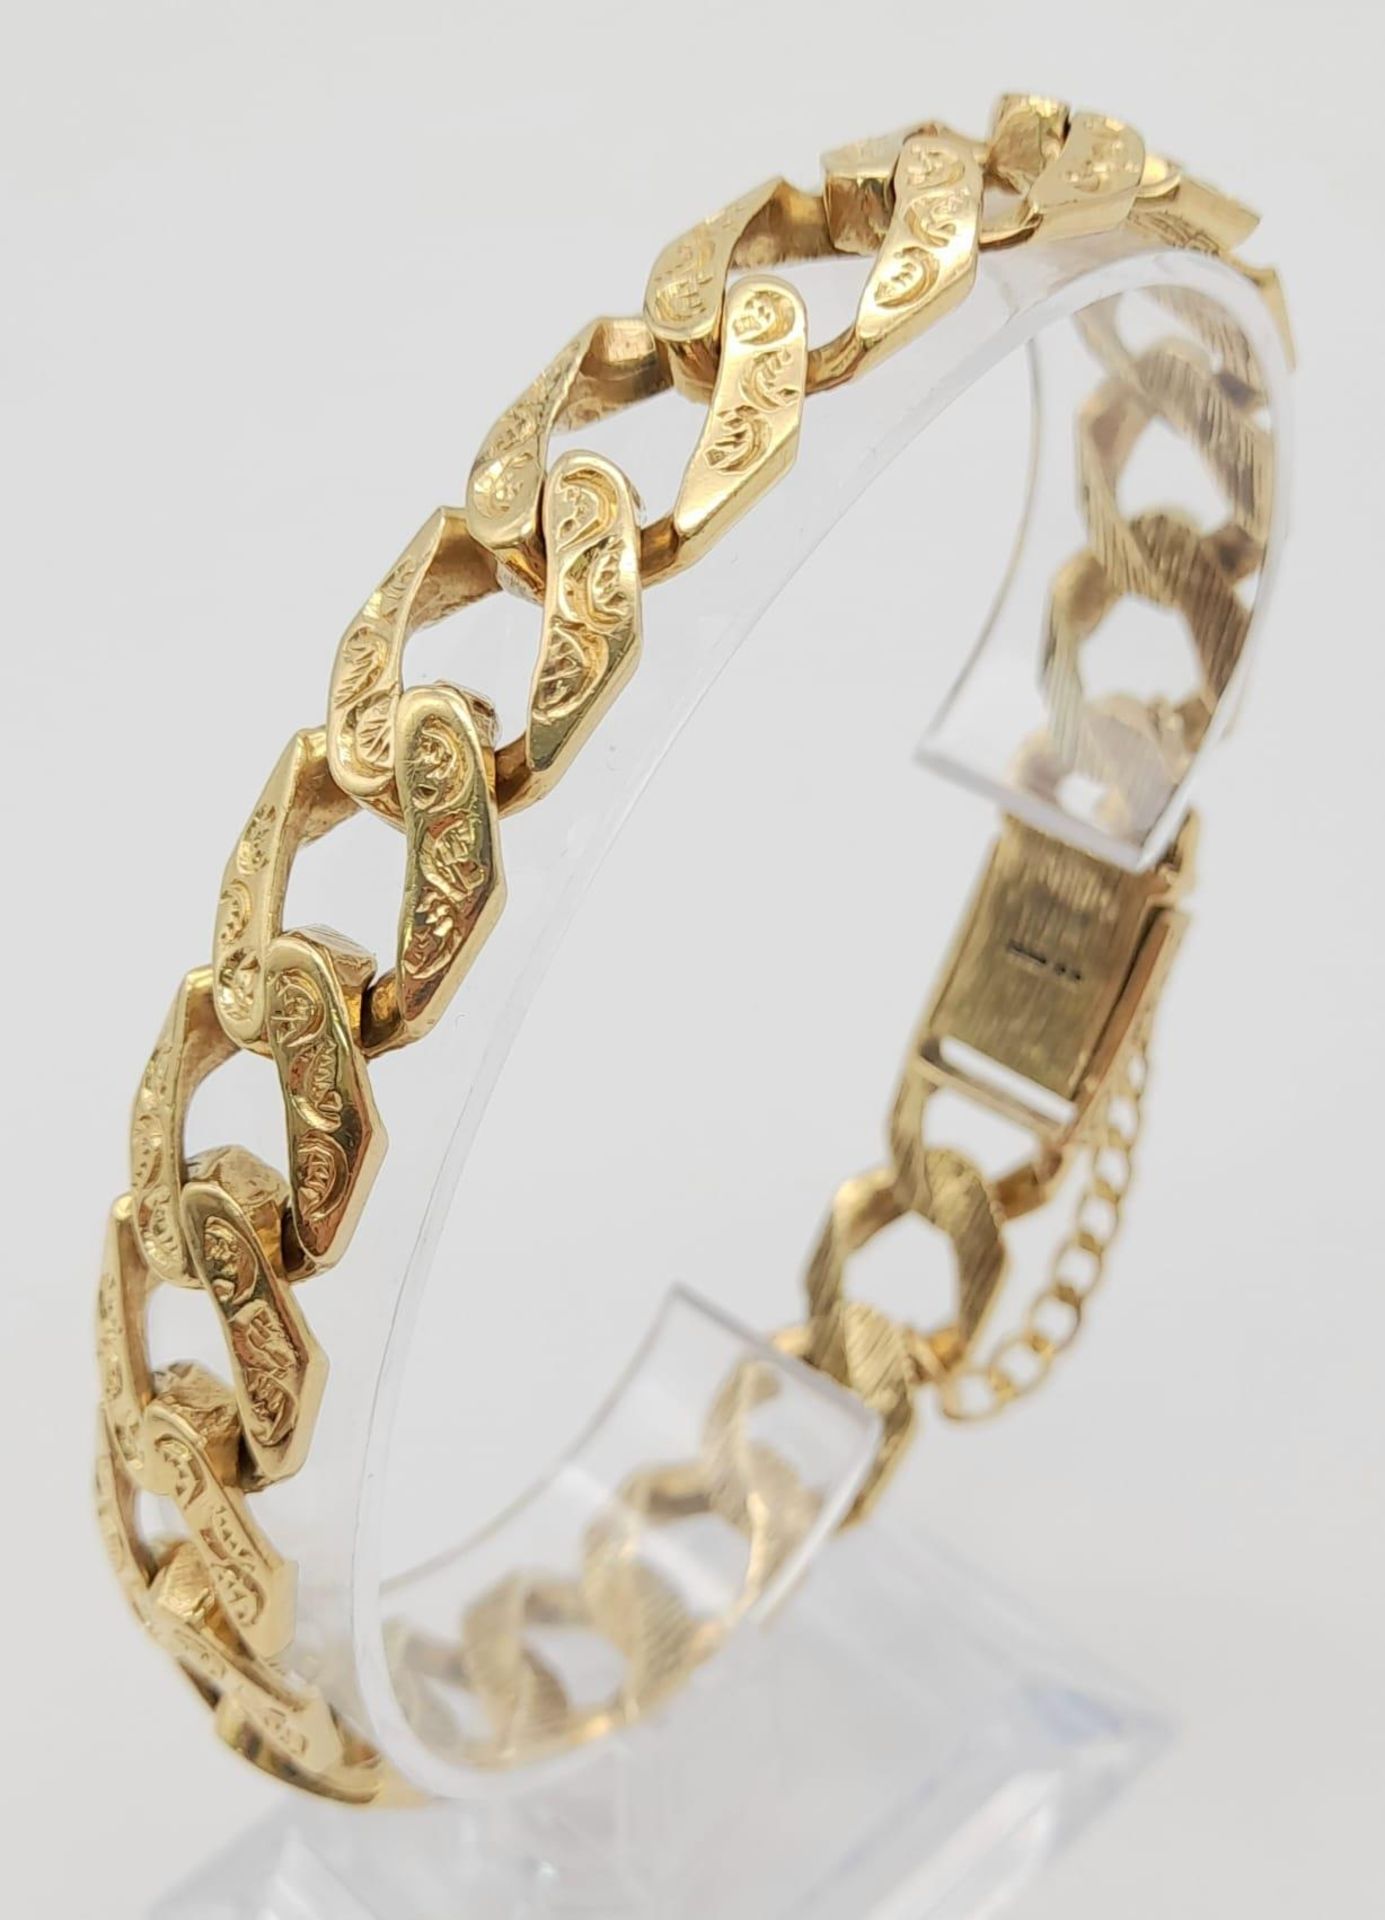 9k yellow gold heavy weight detailed curb bracelet, approx 24cm length, 48.5g weight - Image 3 of 5